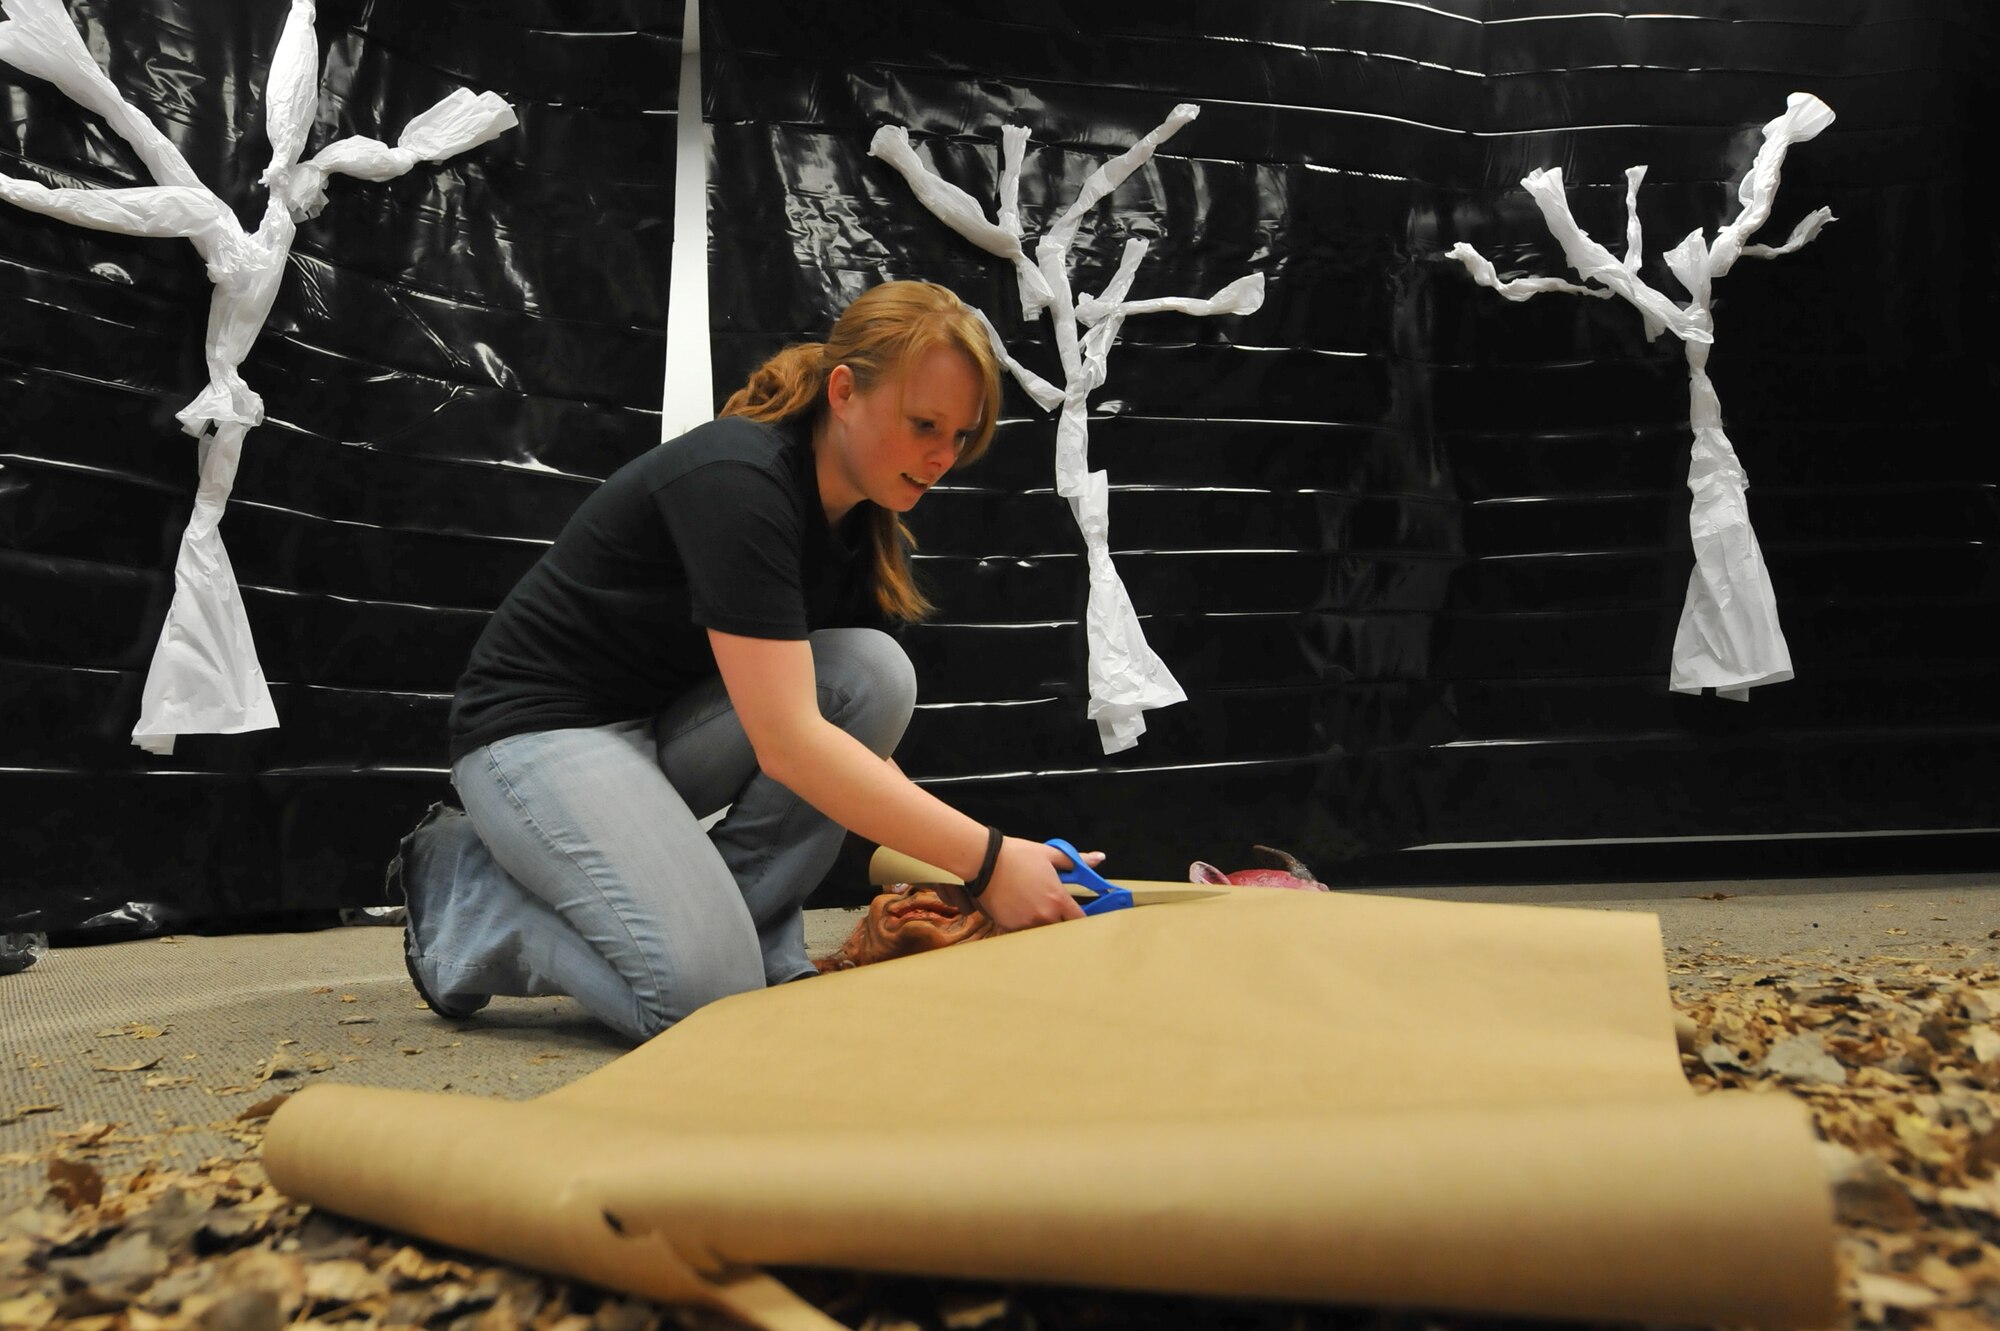 MINOT AIR FORCE BASE, N.D. -- Senior Airman Natasha Ashley, 742nd Missile Squadron missile chef, works on decorations to finalize of her part of the 5th Force Support Squadron haunted house. Airman Ashley and numerous other volunteers made the haunted house inside the Minot Outdoor Recreation facility a success here Oct. 29. Events like these keep Airmen and family morale and spirits high as cold and snow become a mainstay for Team Minot. (U.S. Air Force photo by Master Sgt. Michael Gaddis)